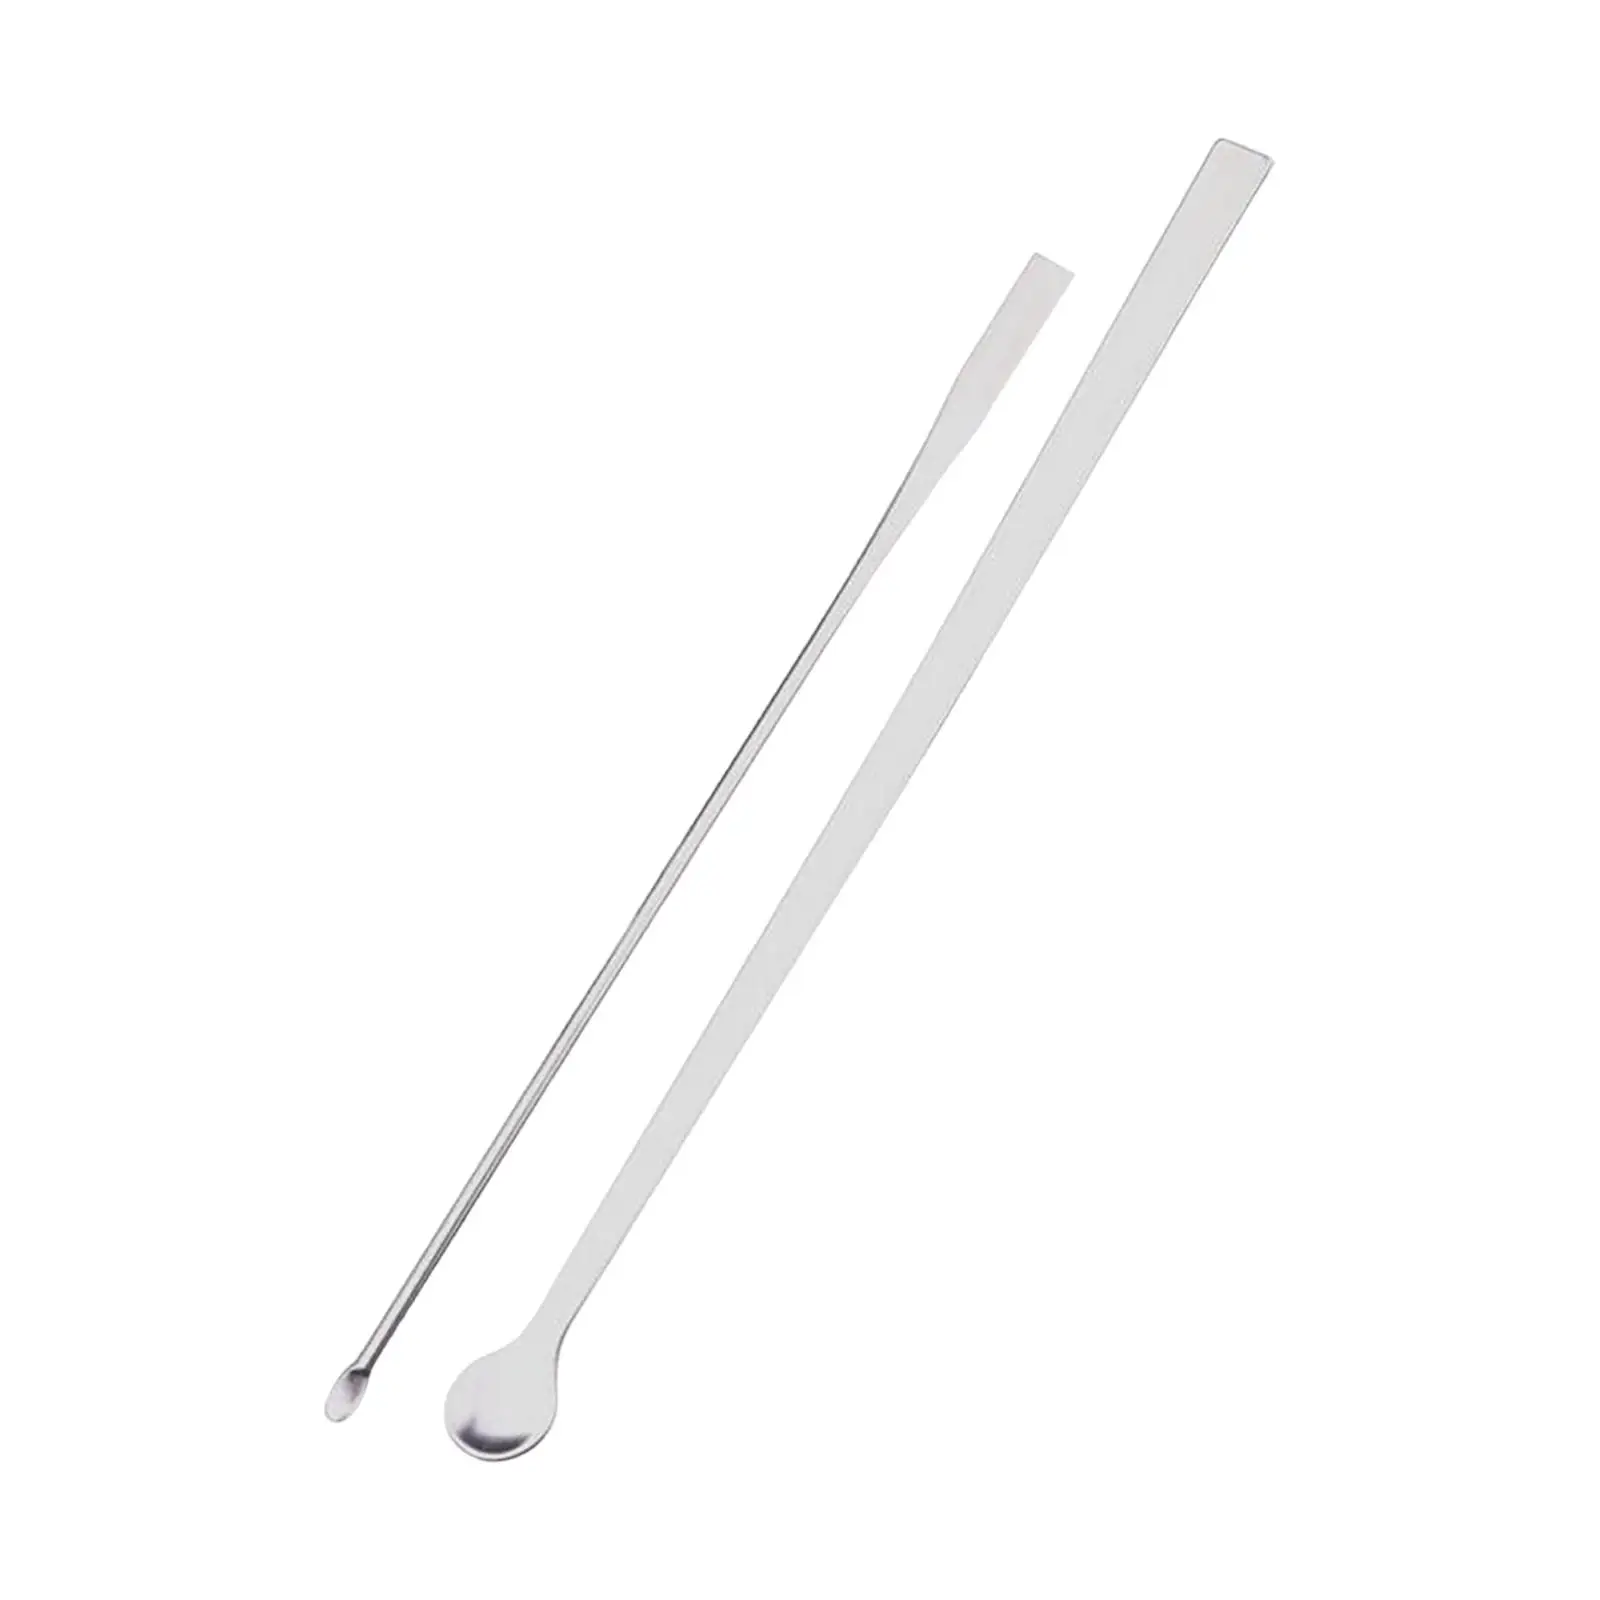 2Pcs Paint Stirrer Crafting Tools Mixing Color Tool 14cm Length Hobby Building Tools Large DIY Stir Rod for Small Scale Model